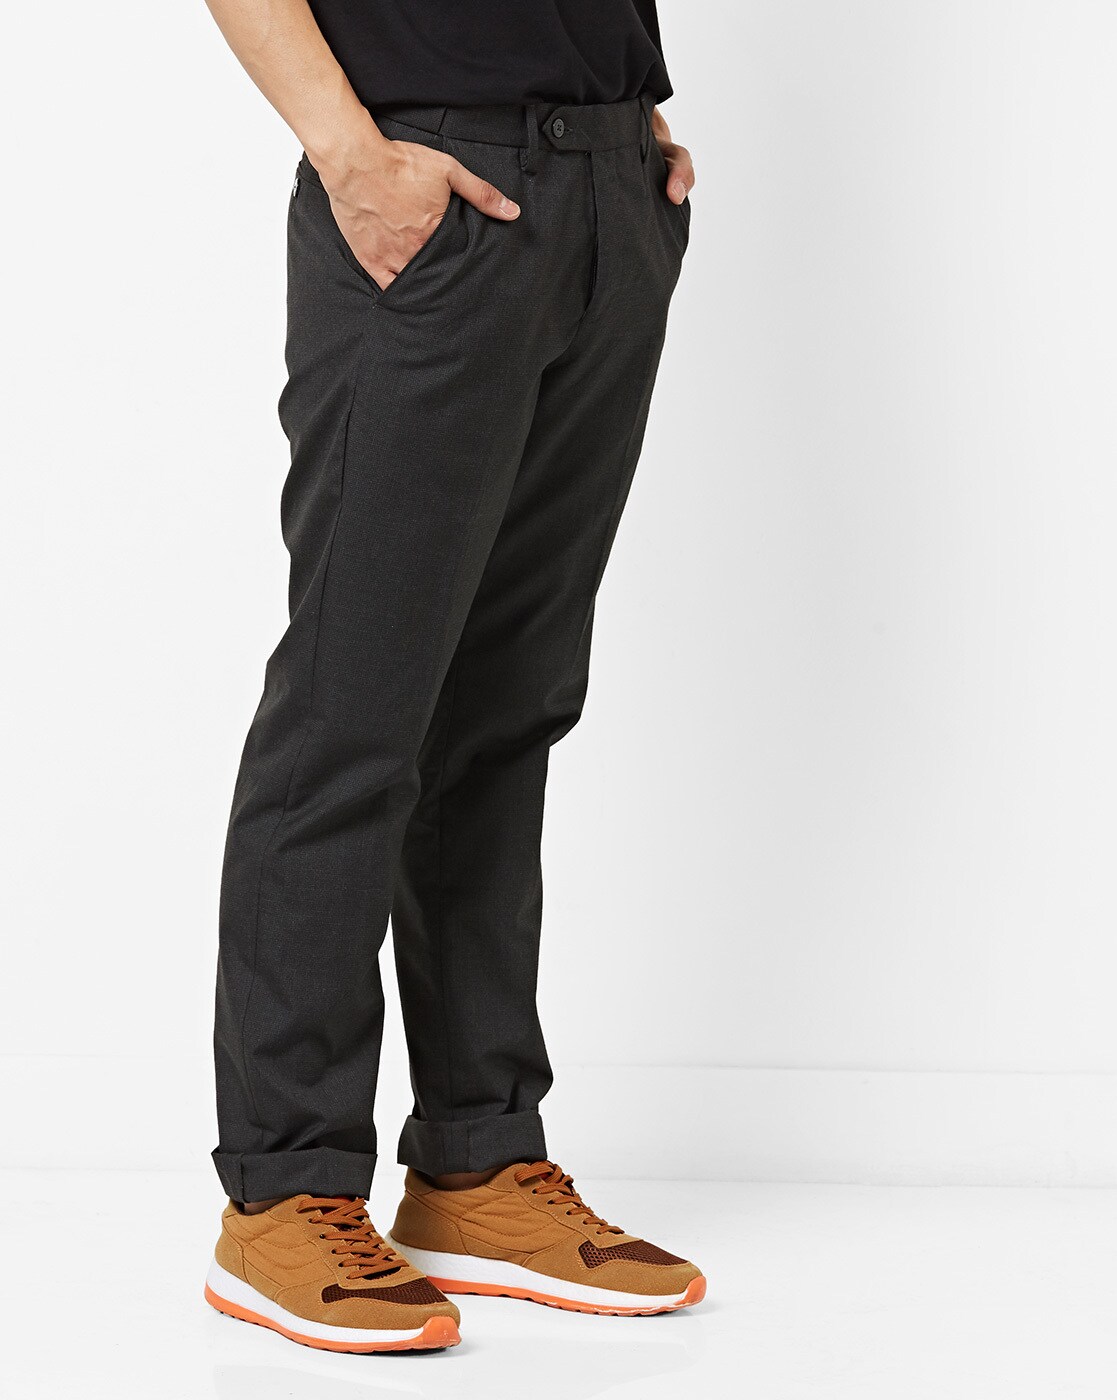 Buy Blue Trousers  Pants for Men by PETER ENGLAND Online  Ajiocom